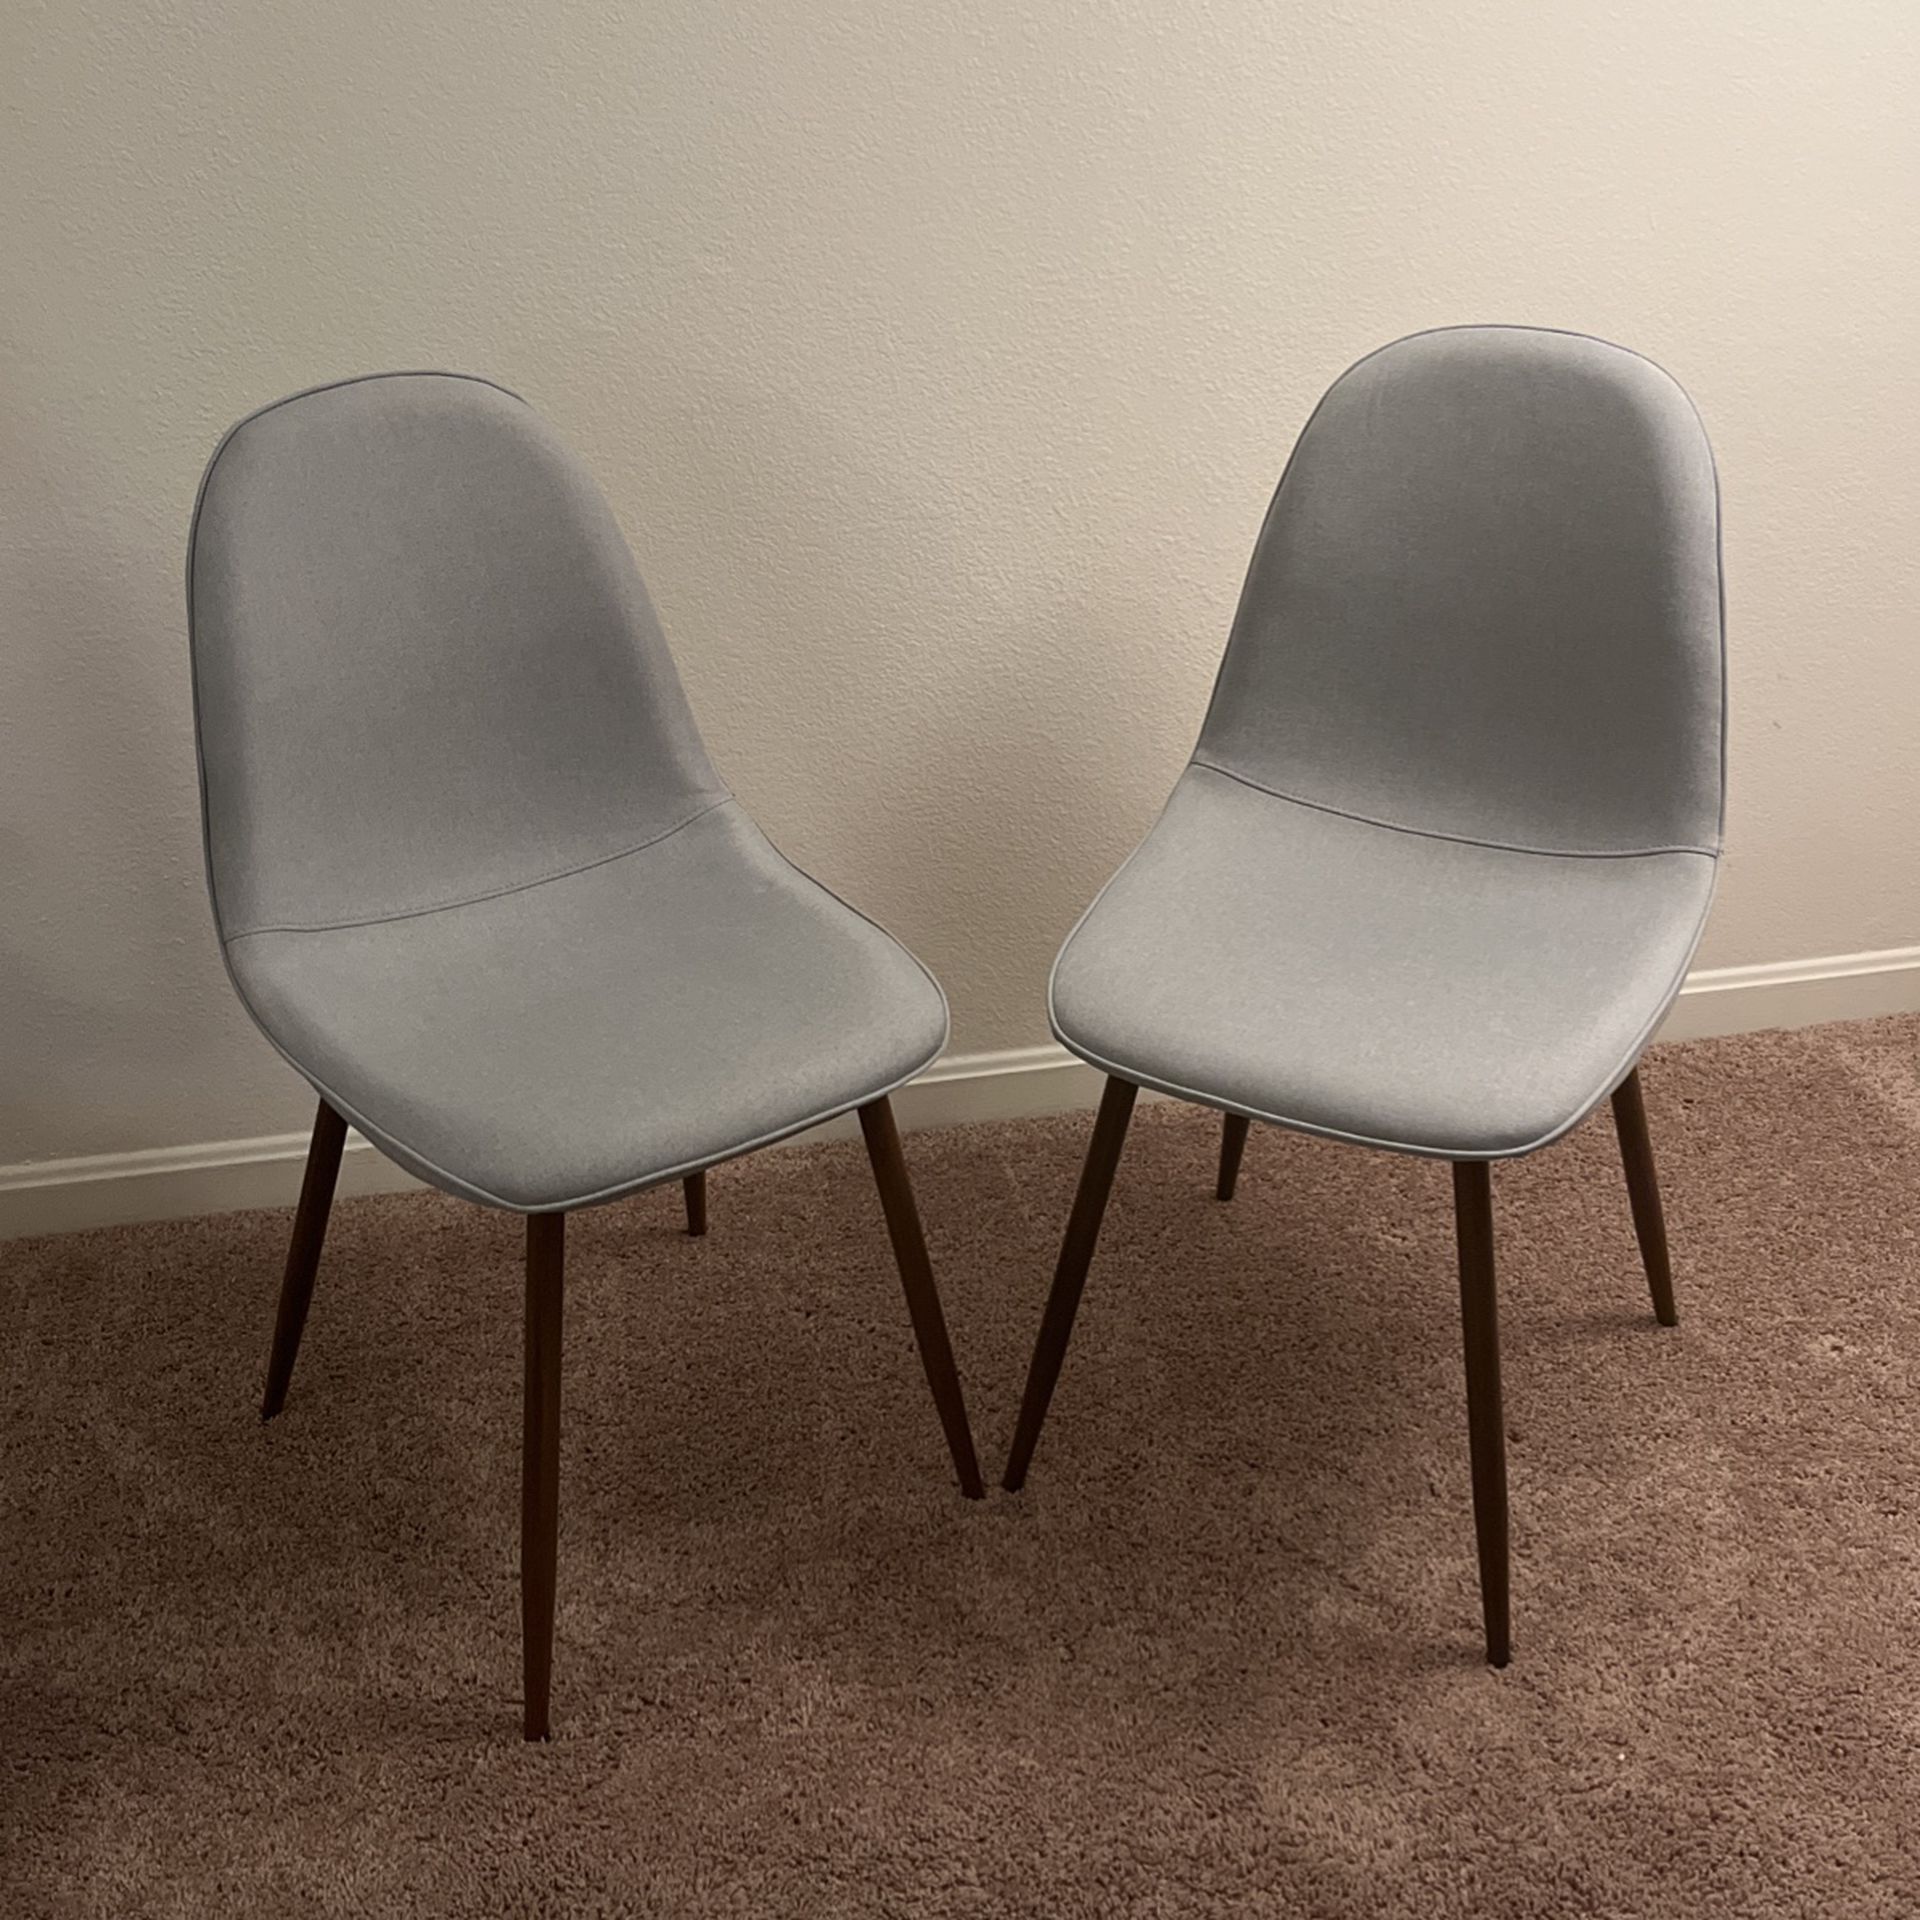 2pc Upholstered Dining Chairs In Light Gray